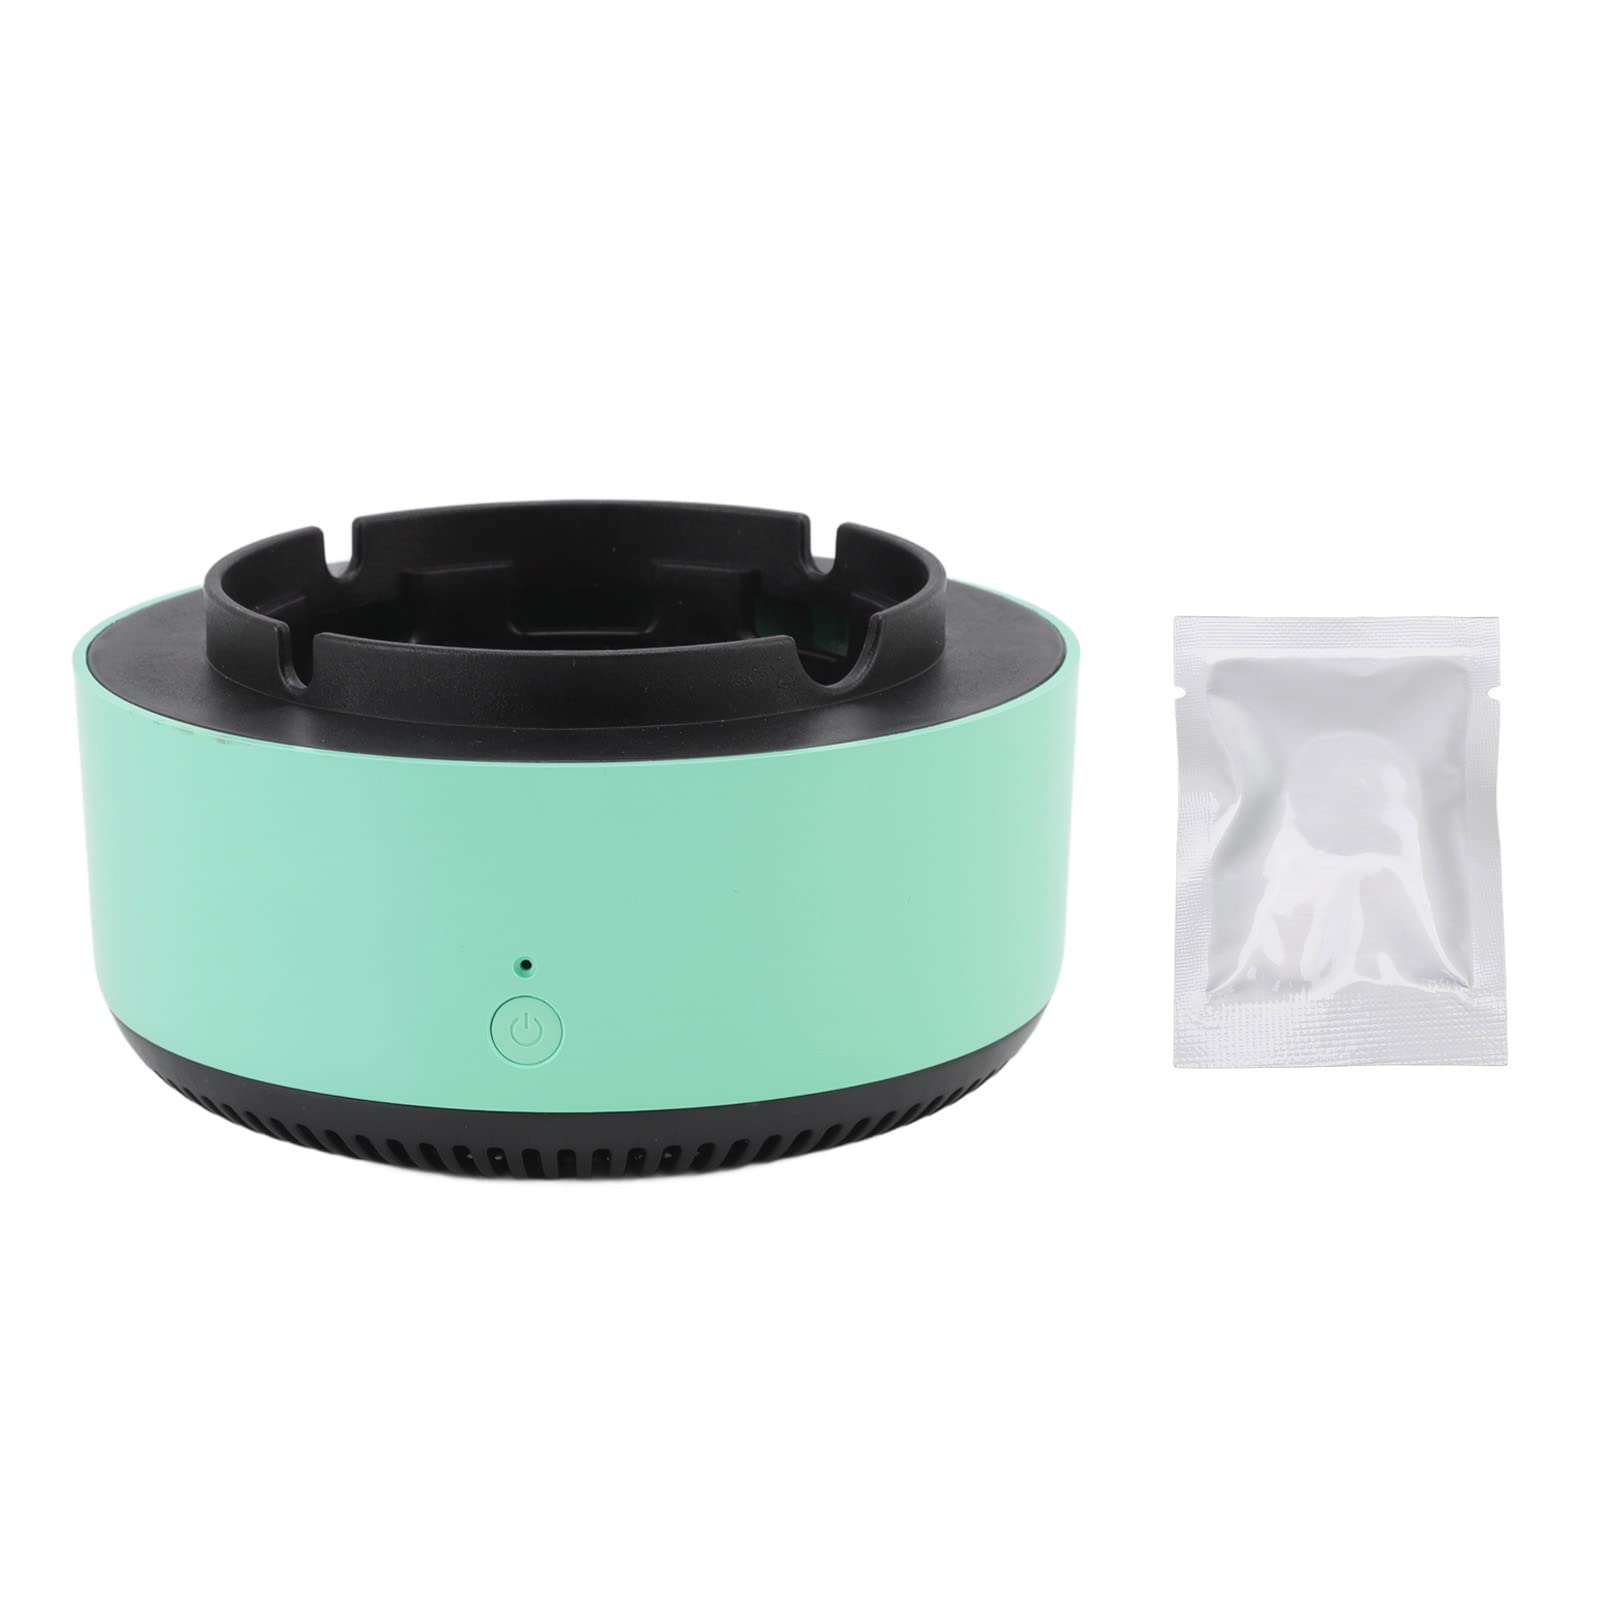 Smart Ashtray, Smokeless Ashtray Low Noise Compact with Aromatherapy Tablet for Office (Green and Black)